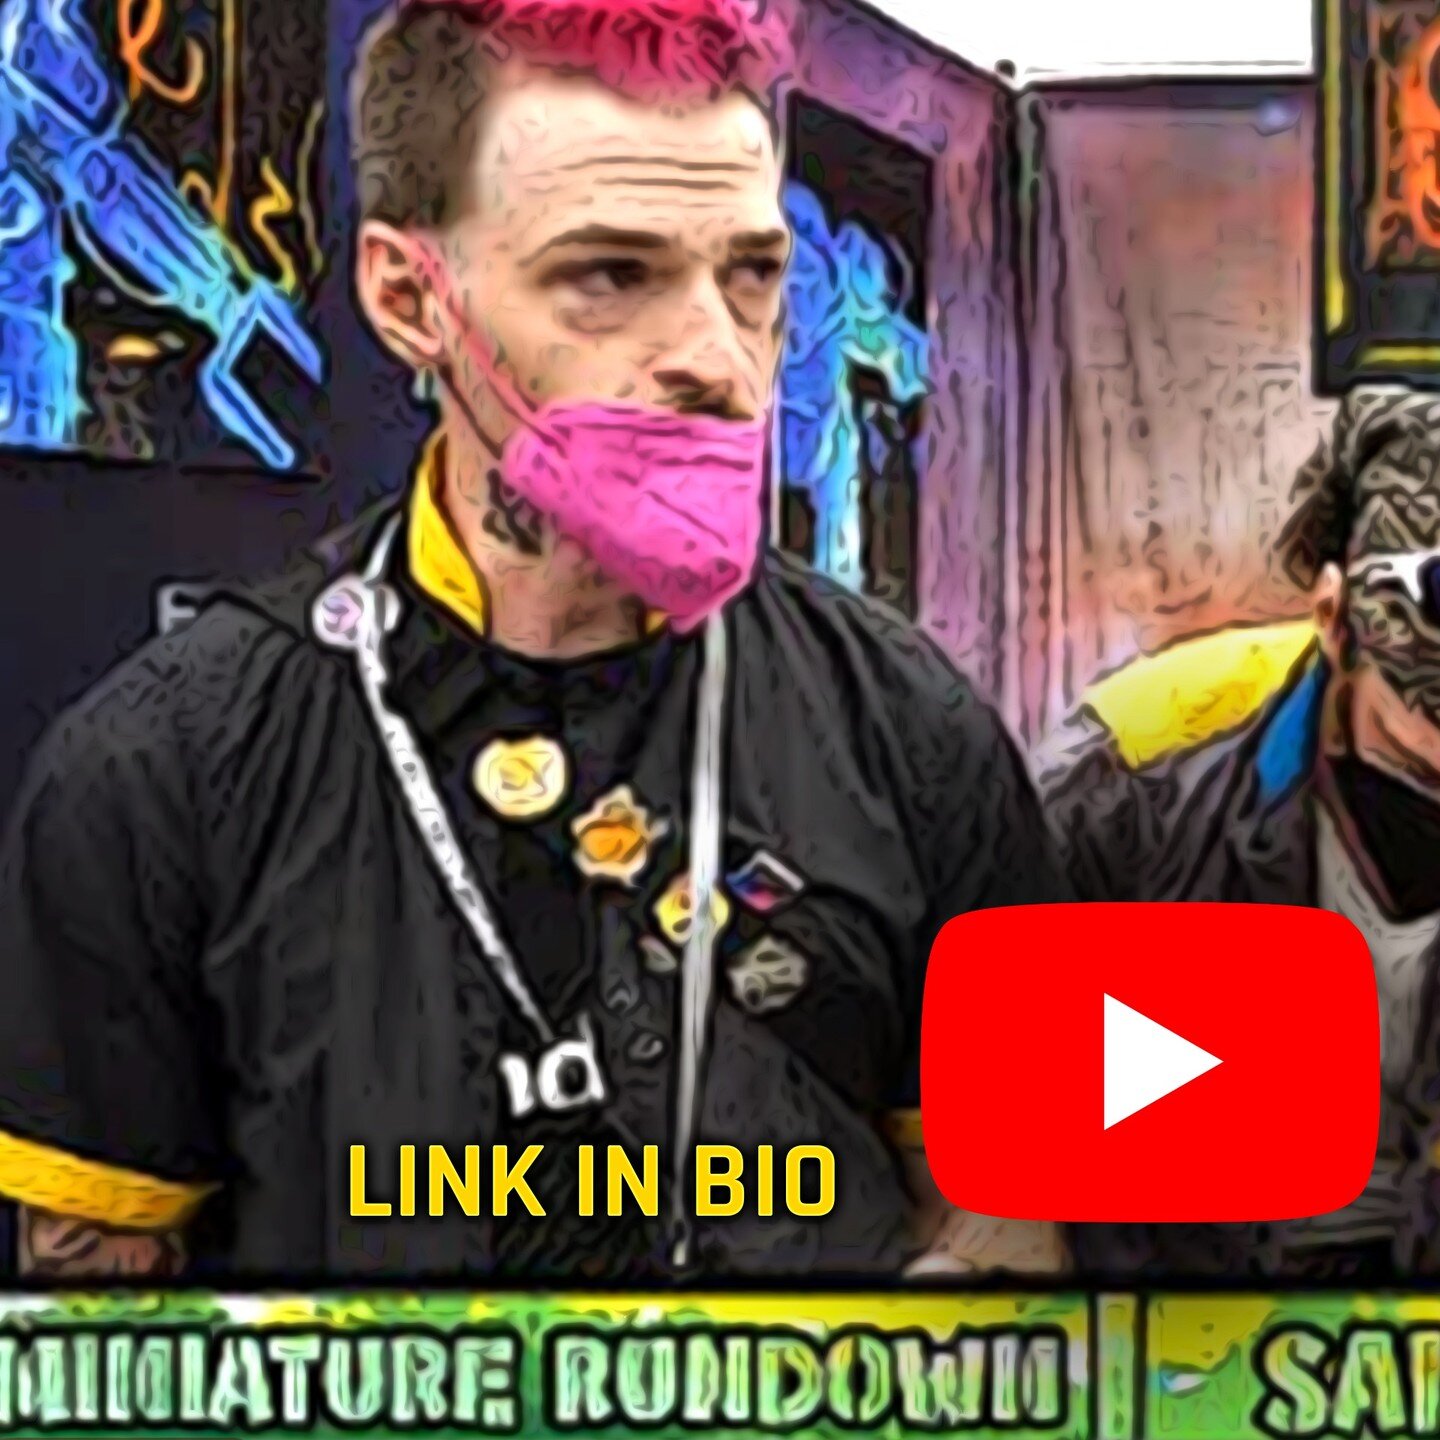 Miniatures Rundown stopped by our booth at #GenCon2022 to talk about SALVAGE: Deep Space! Check out the link in our bio to see the video! #tabletopgaming #cyberpunk #roleplaying #boardgames #exosuits #miniatures #spacehulk